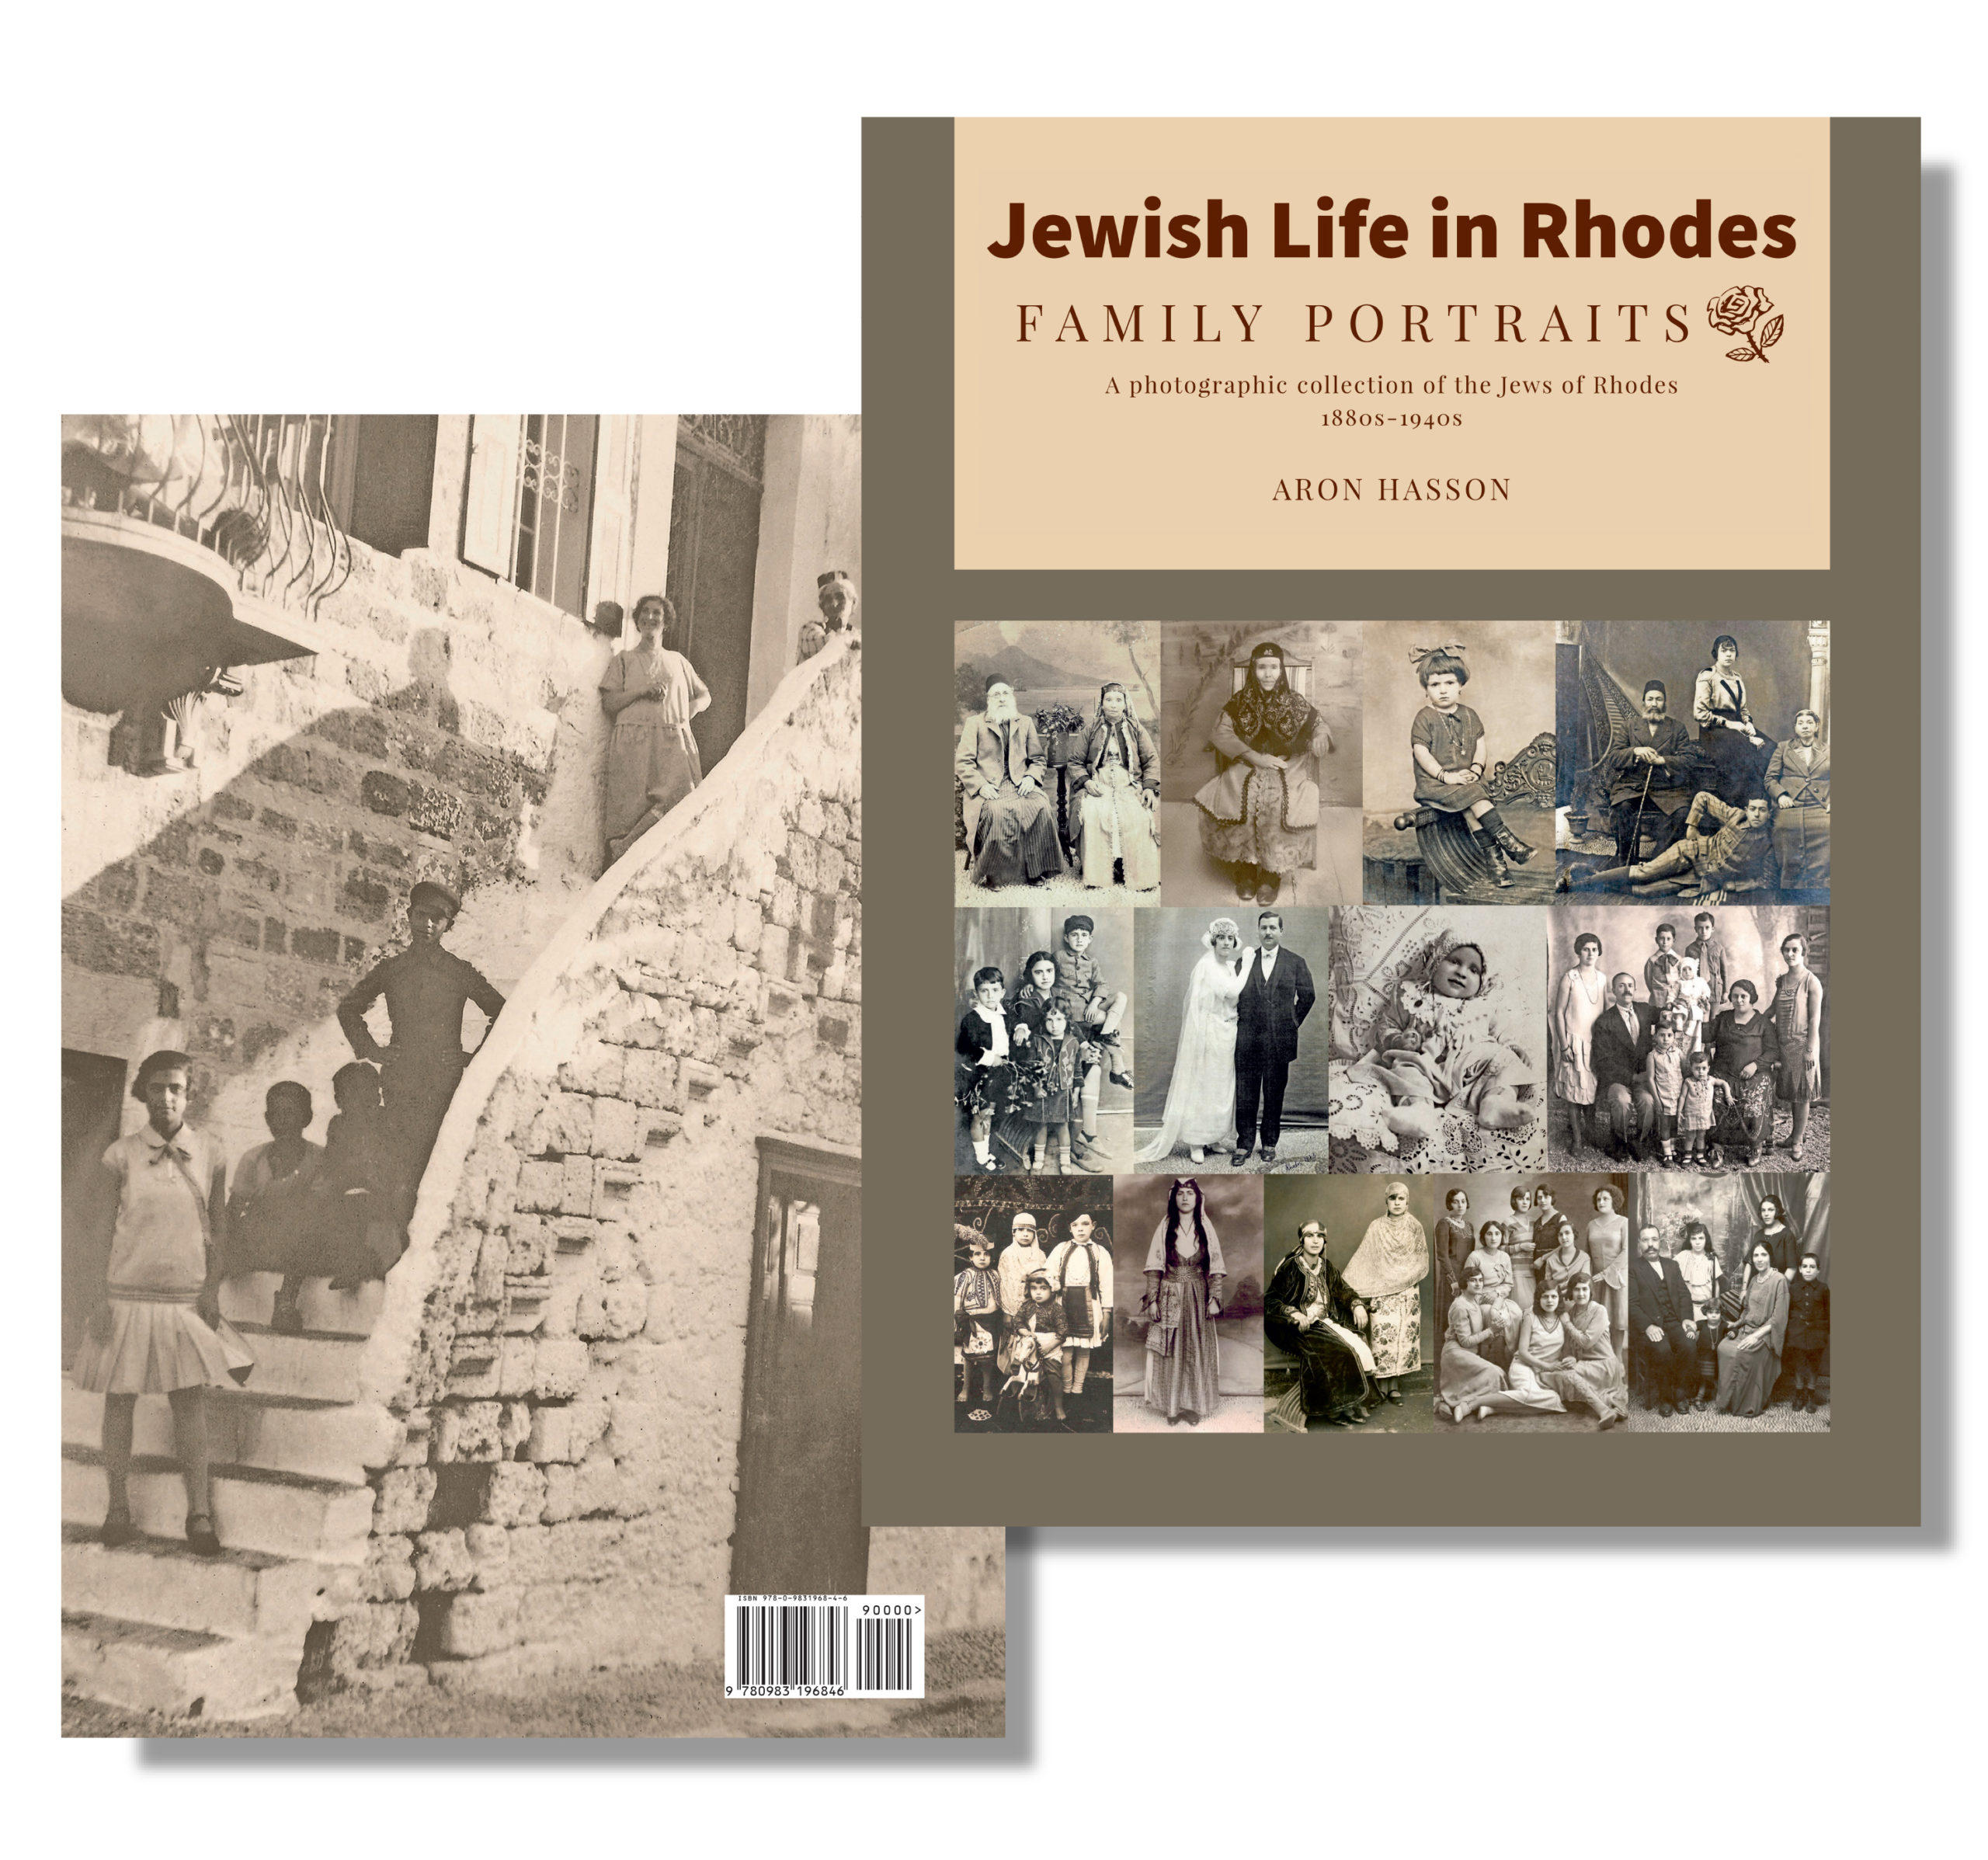 Jewish Life in Rhodes "Family Portraits"